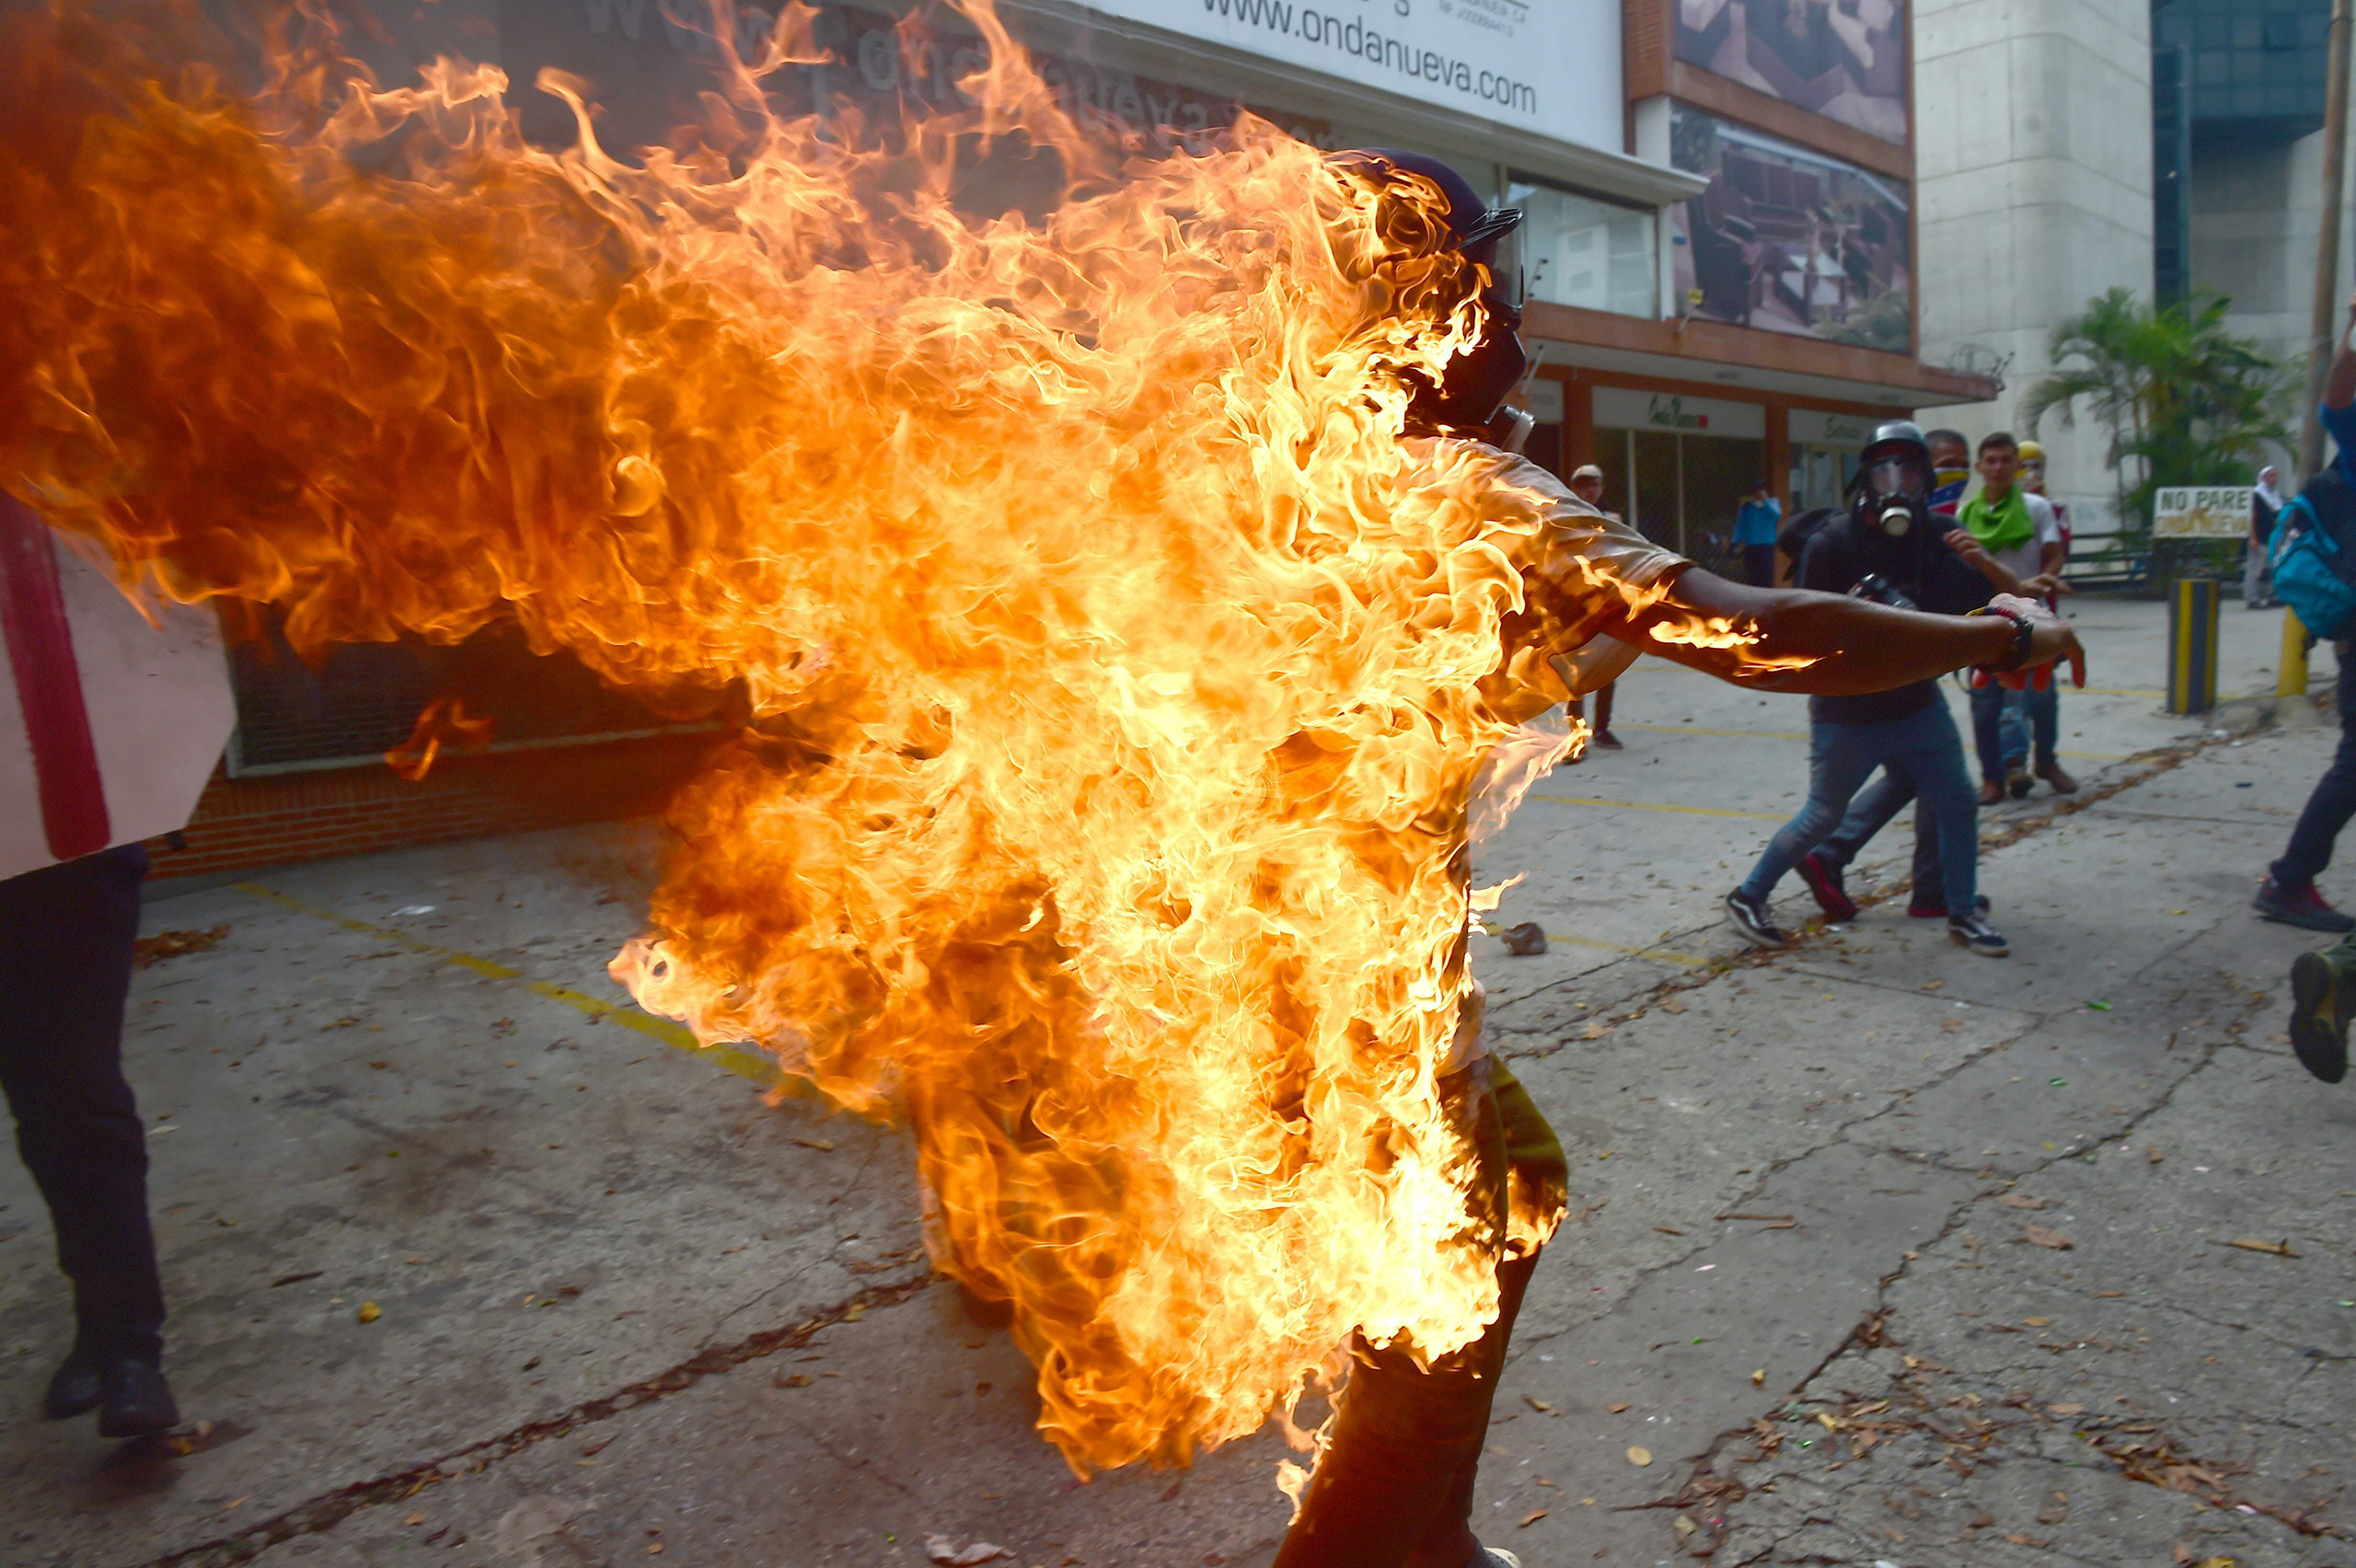 A man set ablaze during an anti-Maduro protest runs to put out the flames in Caracas on May 3, 2017.